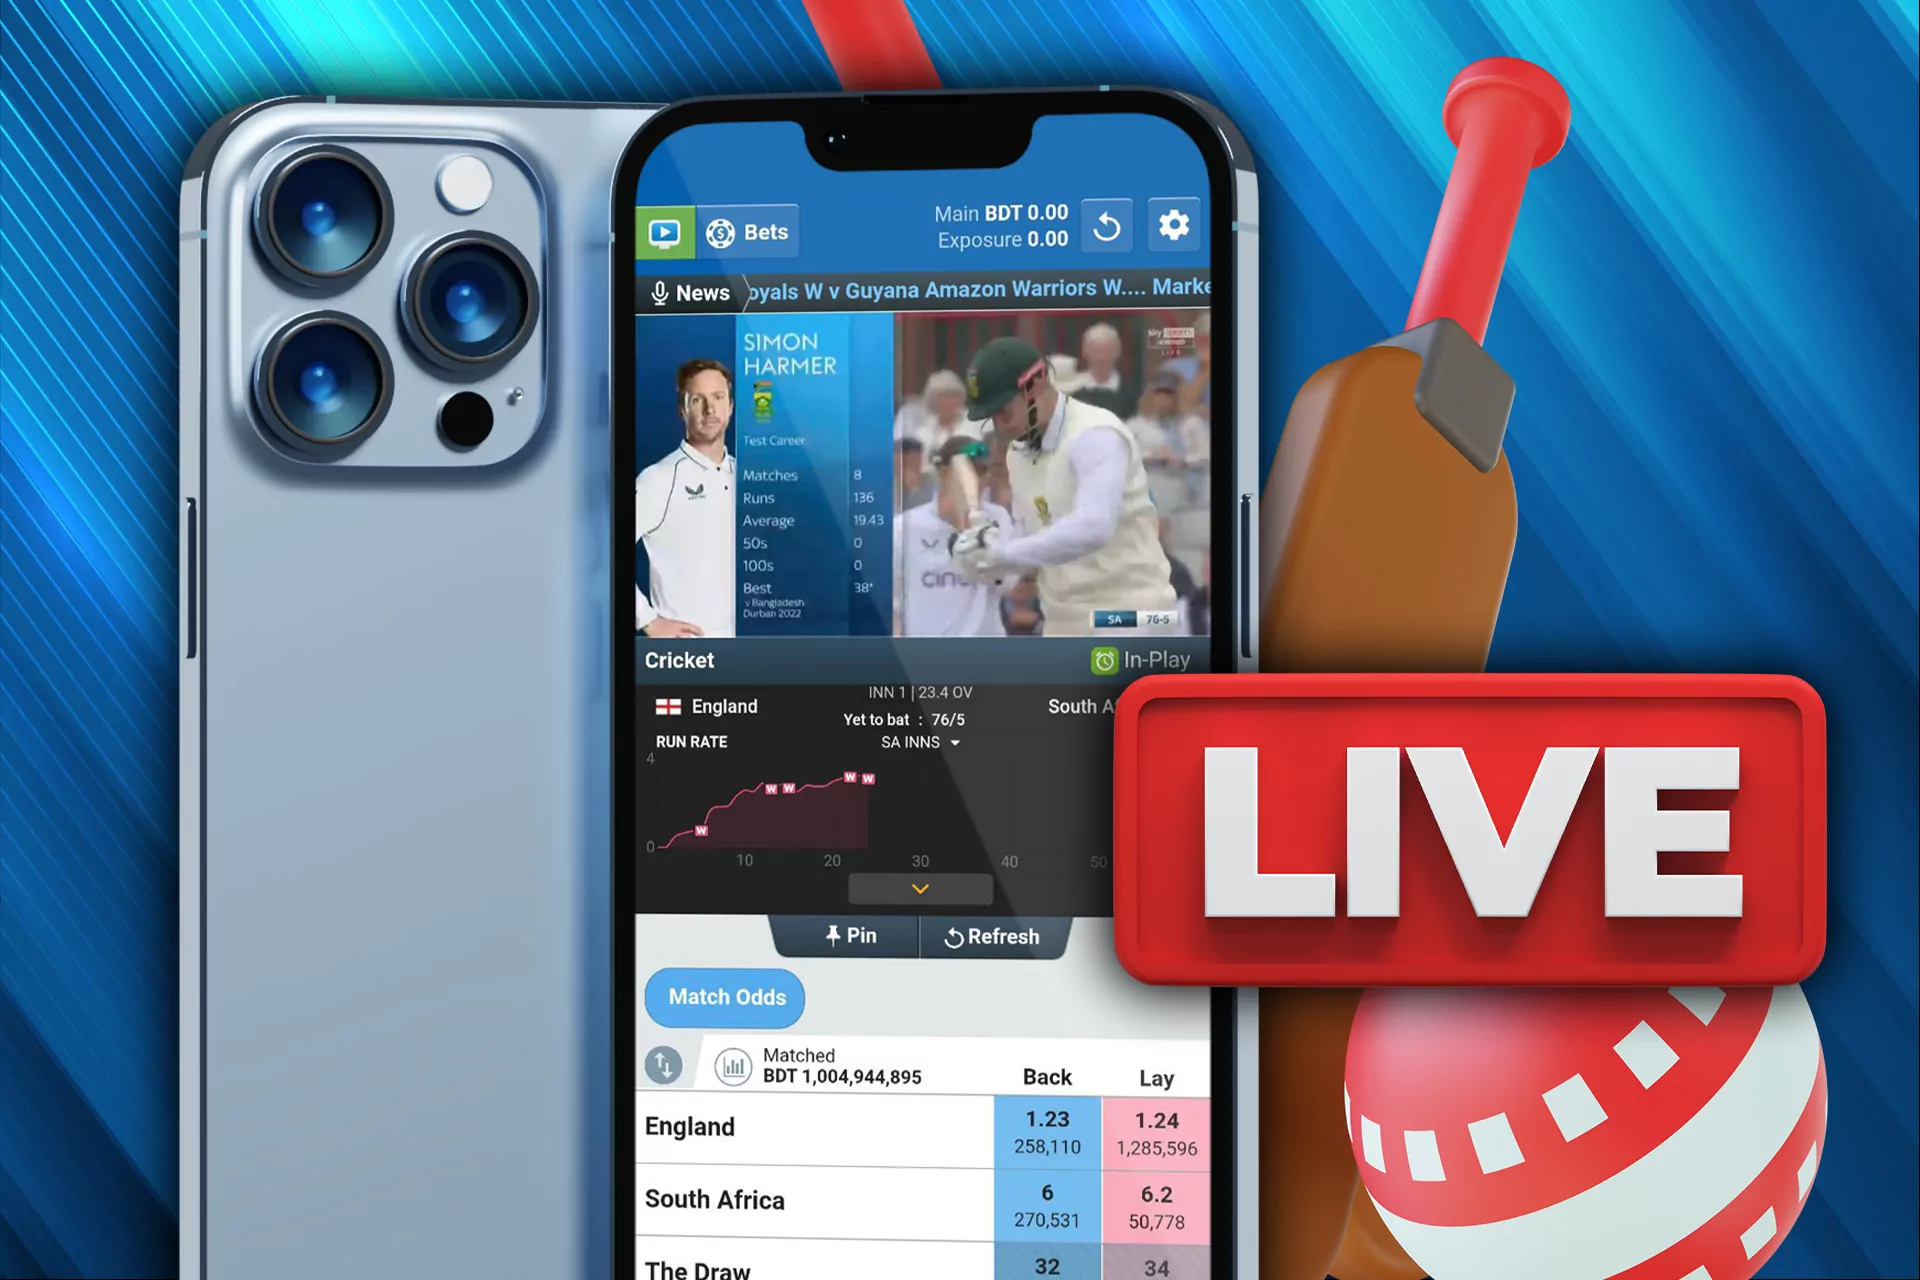 Place bets during the match and watch the streamings in the Crickex app.